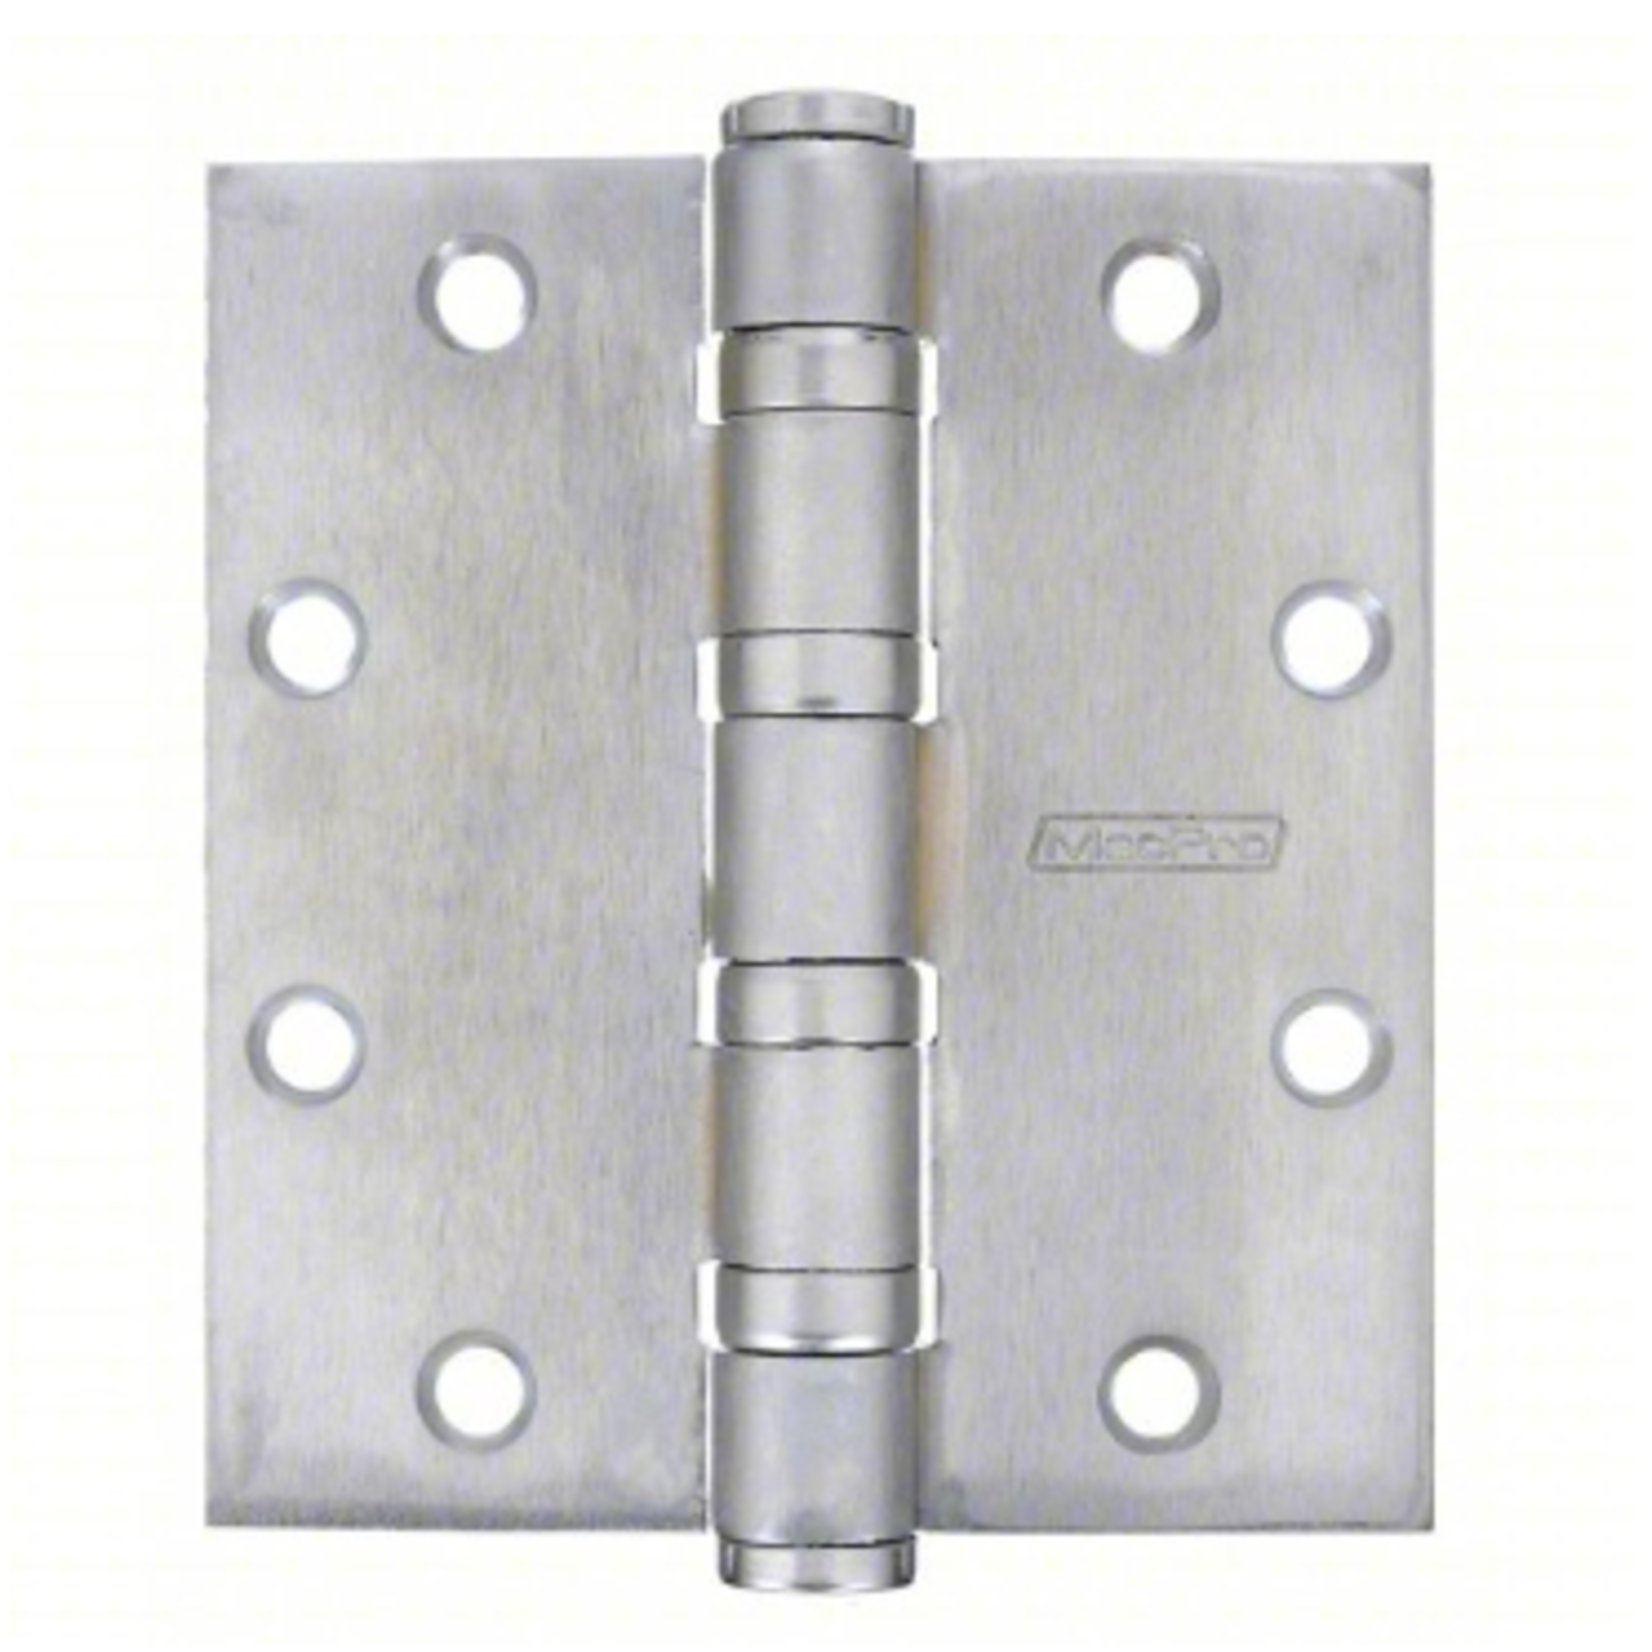 5 IN SQUARE HINGE FOR COMMERCIAL DOOR